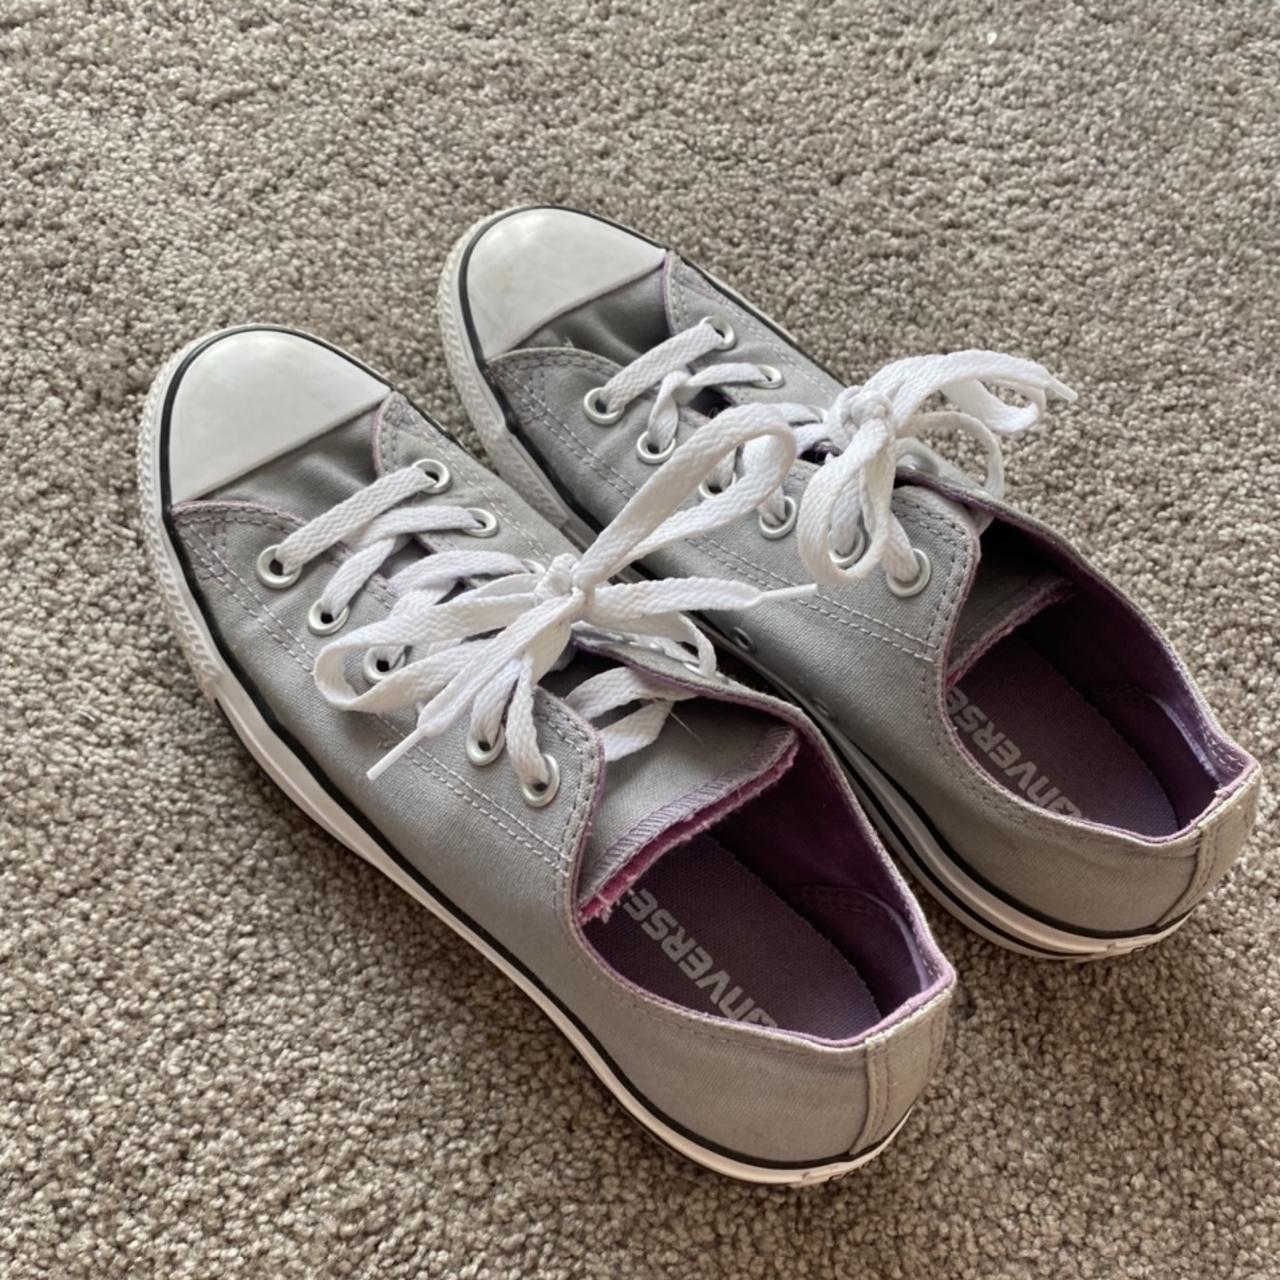 Grey convers with purple tab. Barely worn but are a... - Depop